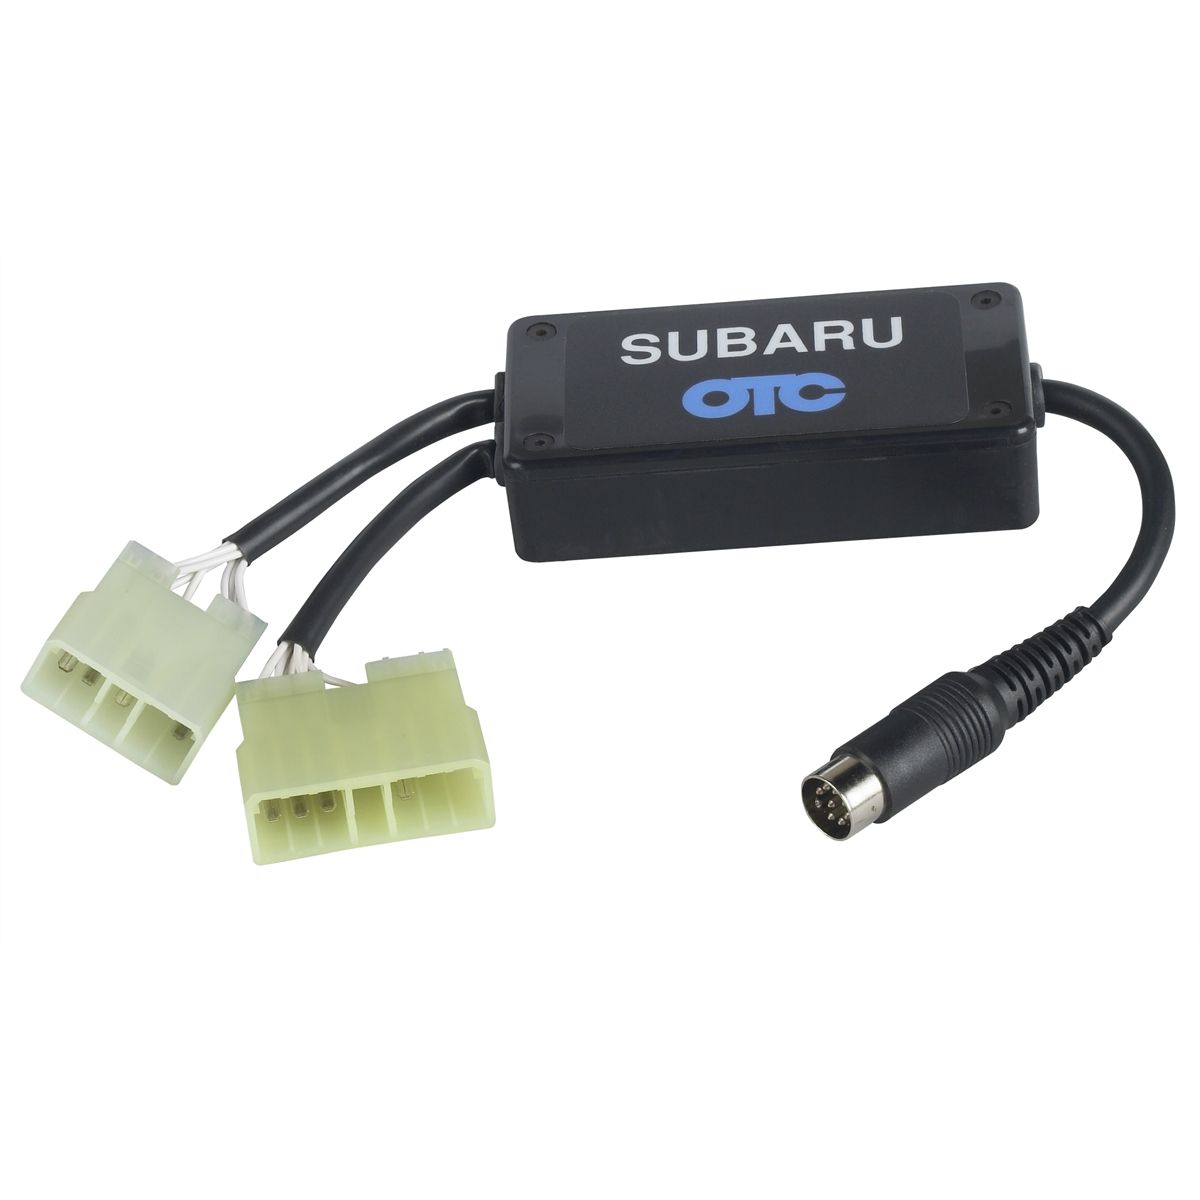 Adapter Cable for Monitor Scan Tool - Subaru